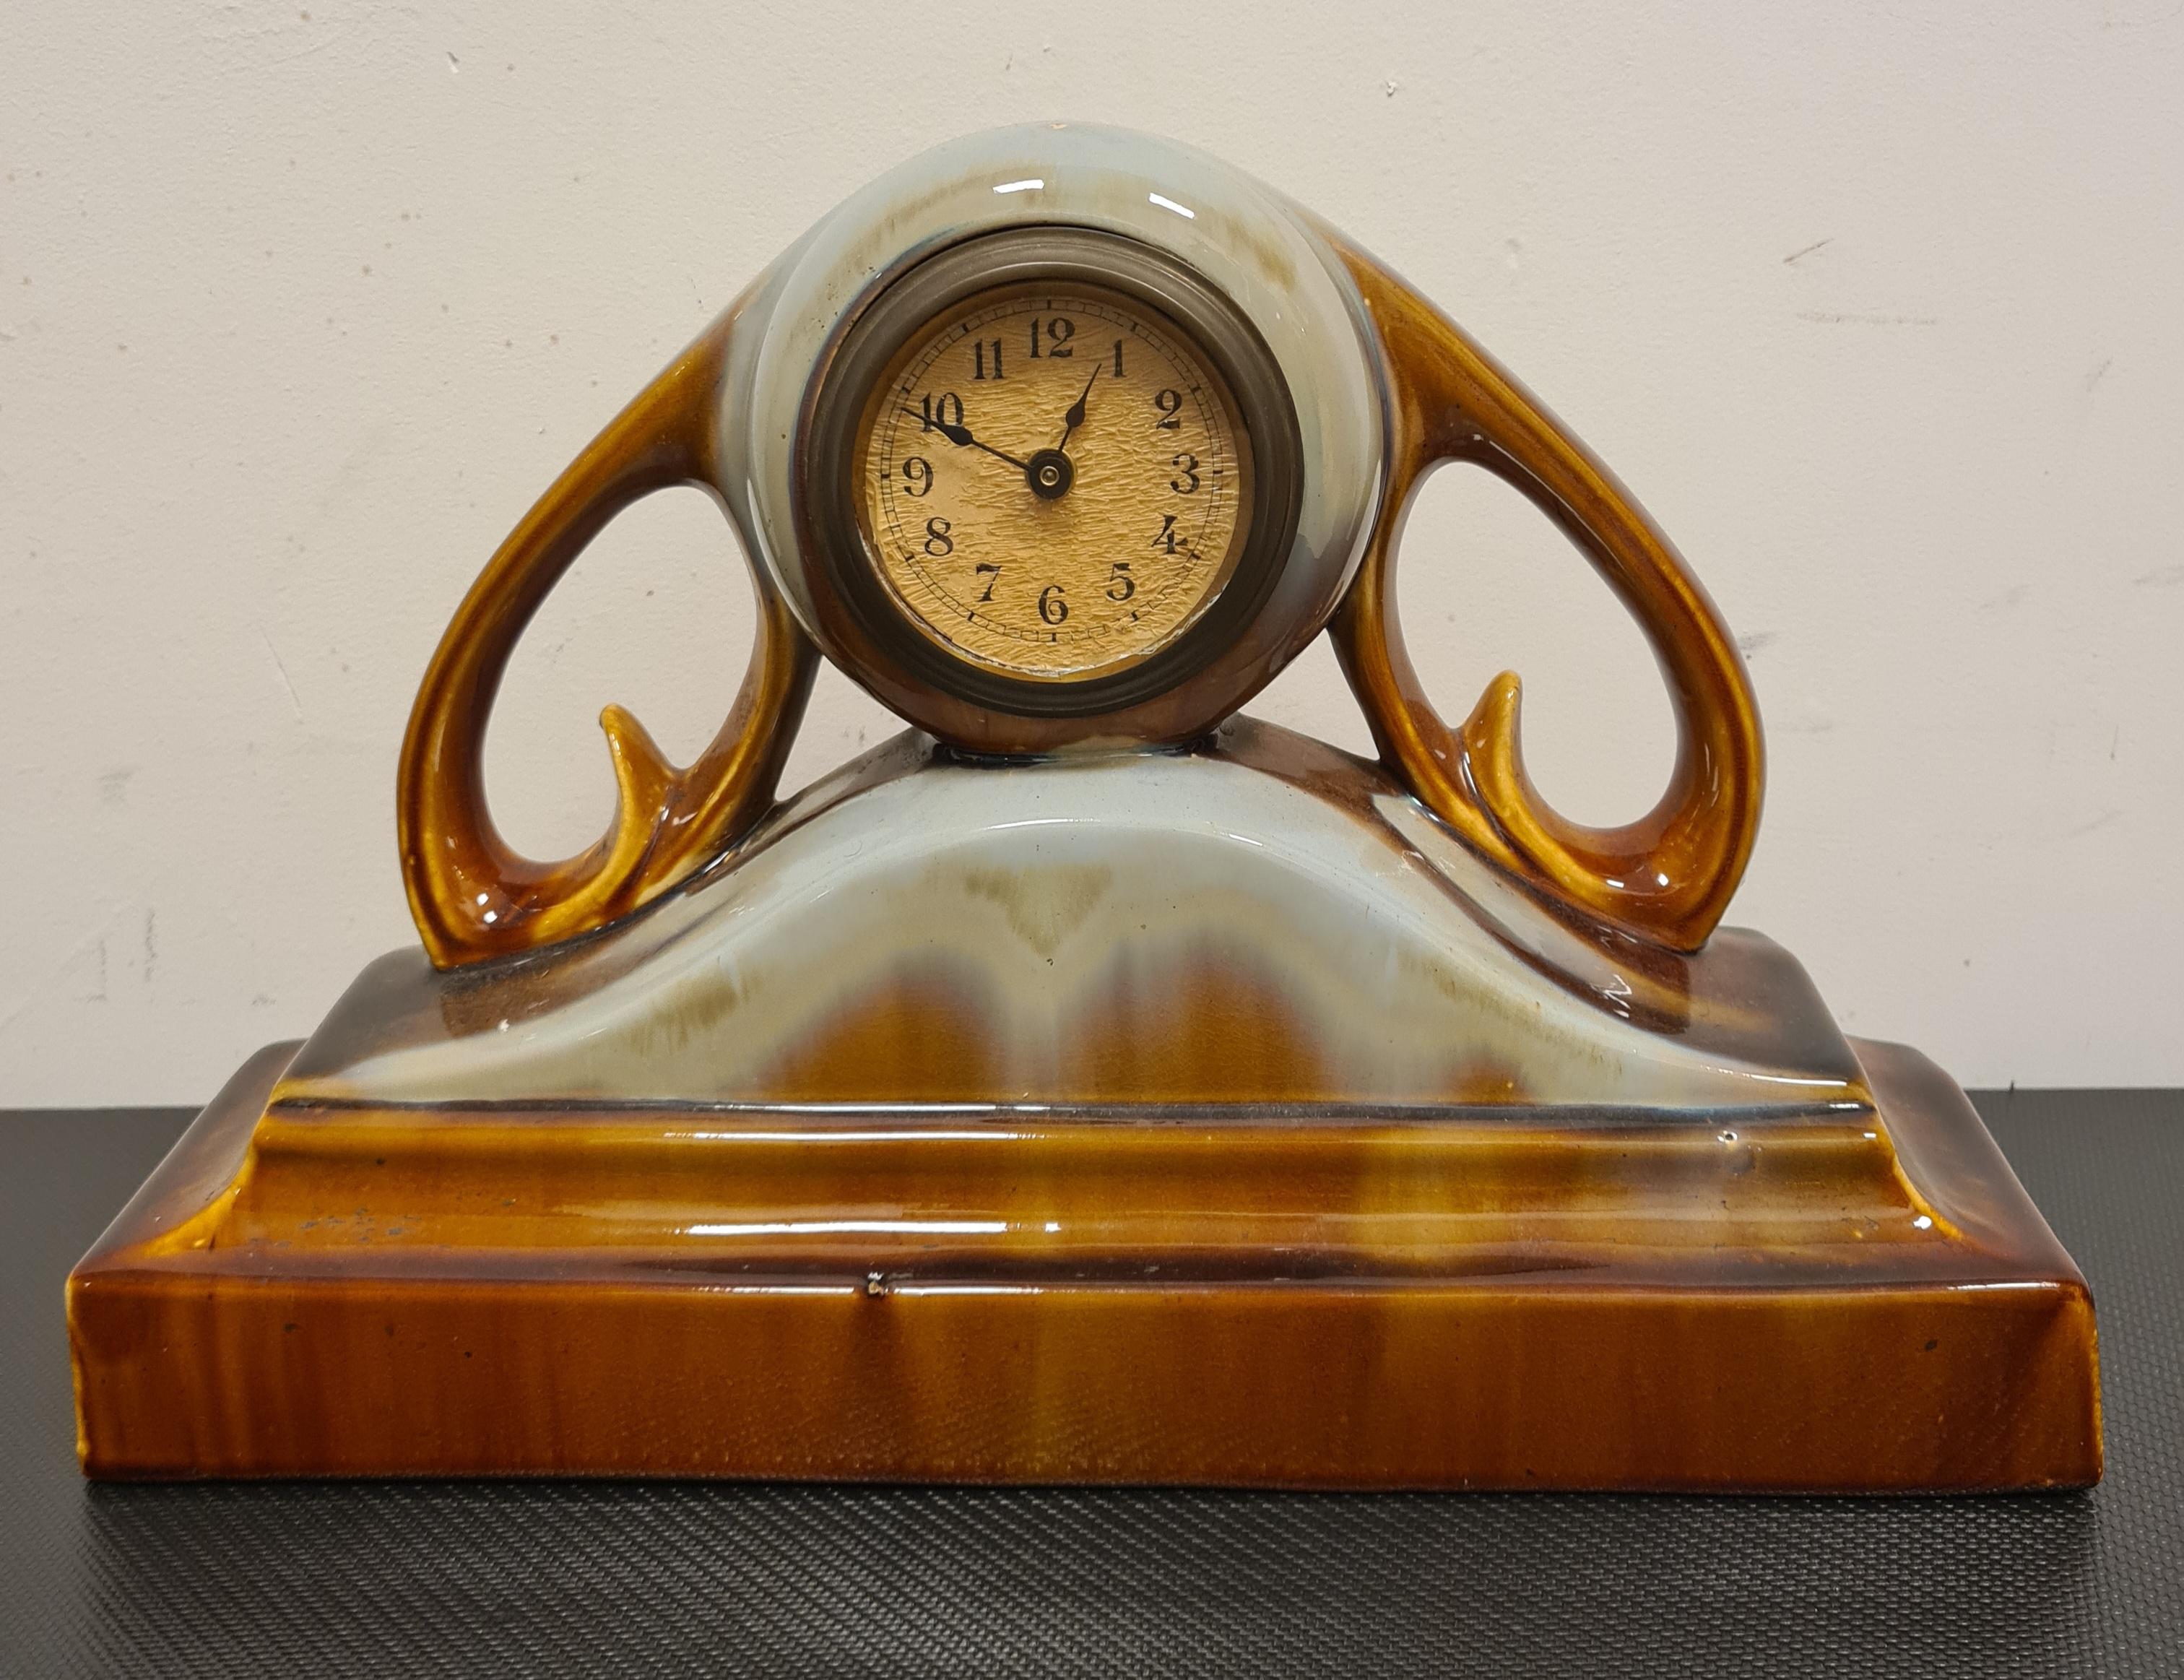 Ceramic clock from the 1940s.

Fine centerpiece or mantel clock made in the 1940s.

The structure is completely made of glazed ceramic with shades ranging from brown to light blue.

The clock is working and keyed and is in excellent condition, with